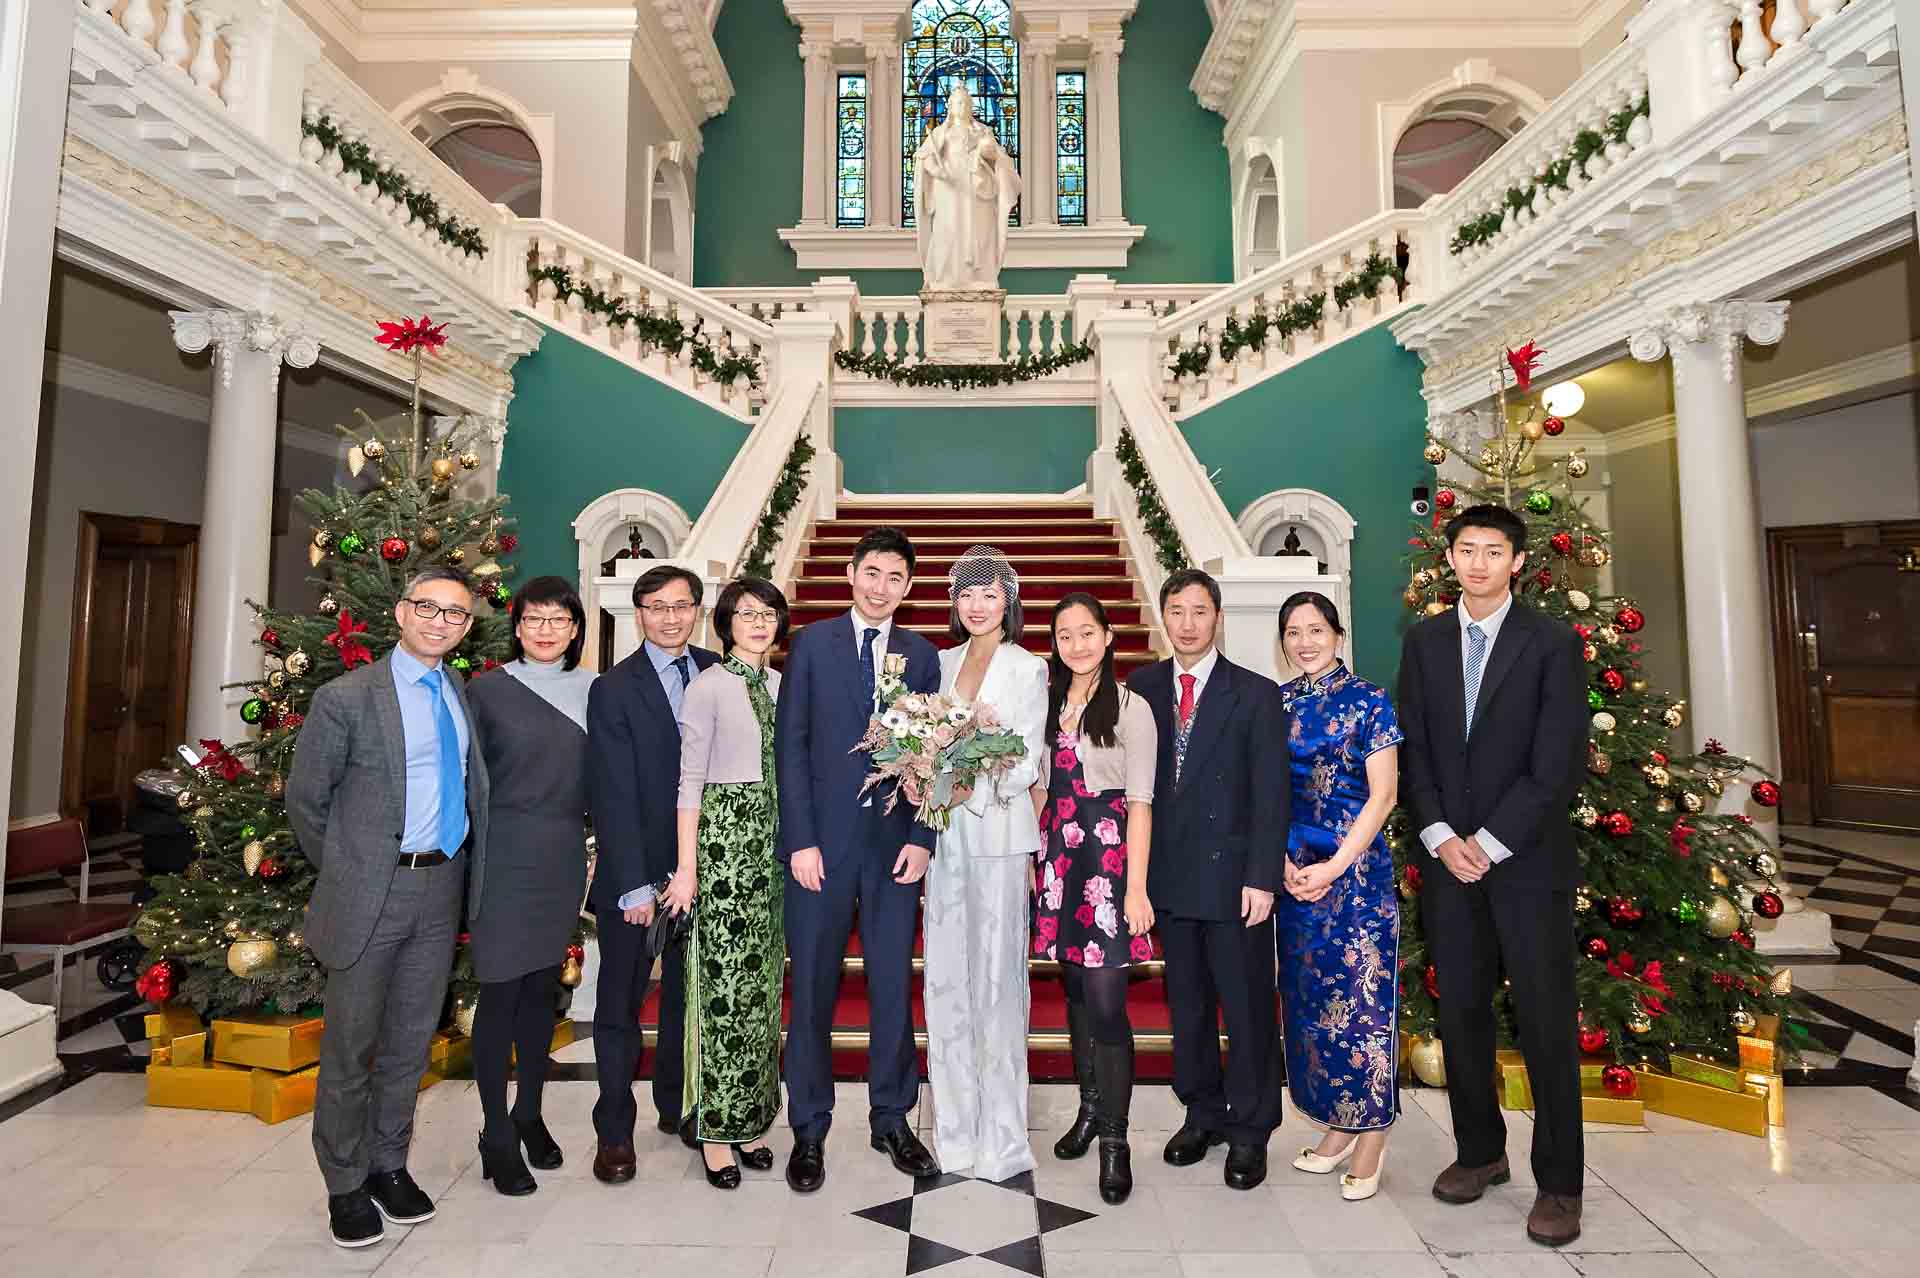 The entire wedding party pose in-front of the staircase in the Victorian Hall of Woolwich Town Hall